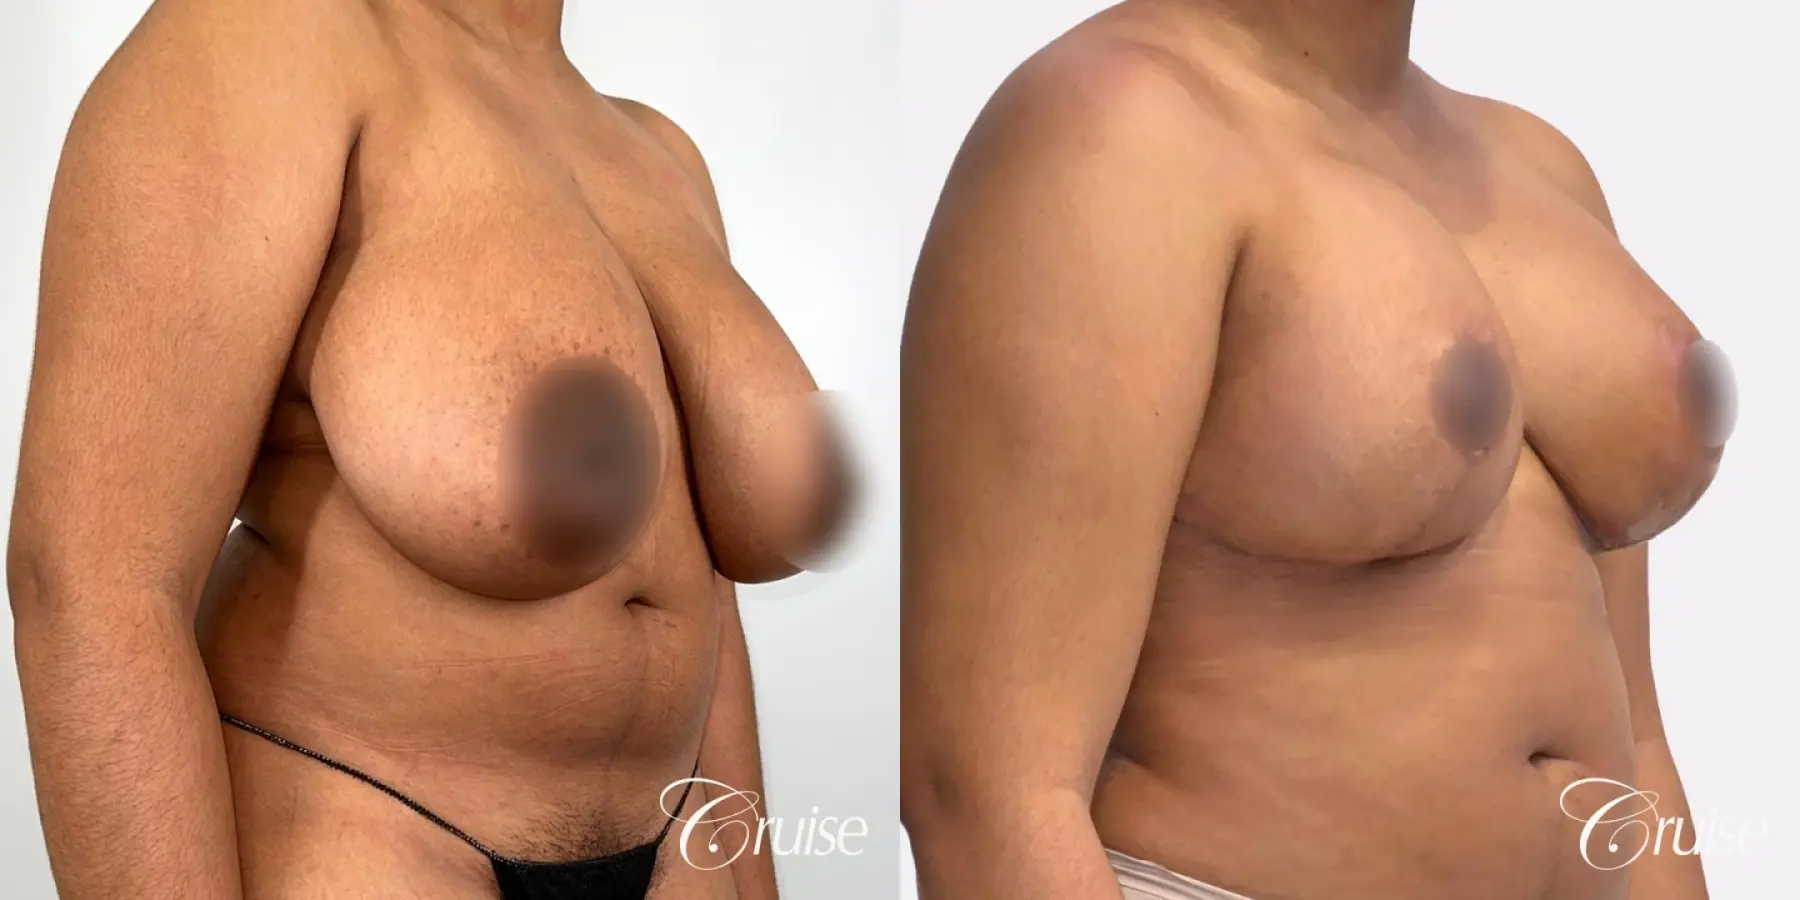 Breast Reduction & Breast Lift - Before and After 2